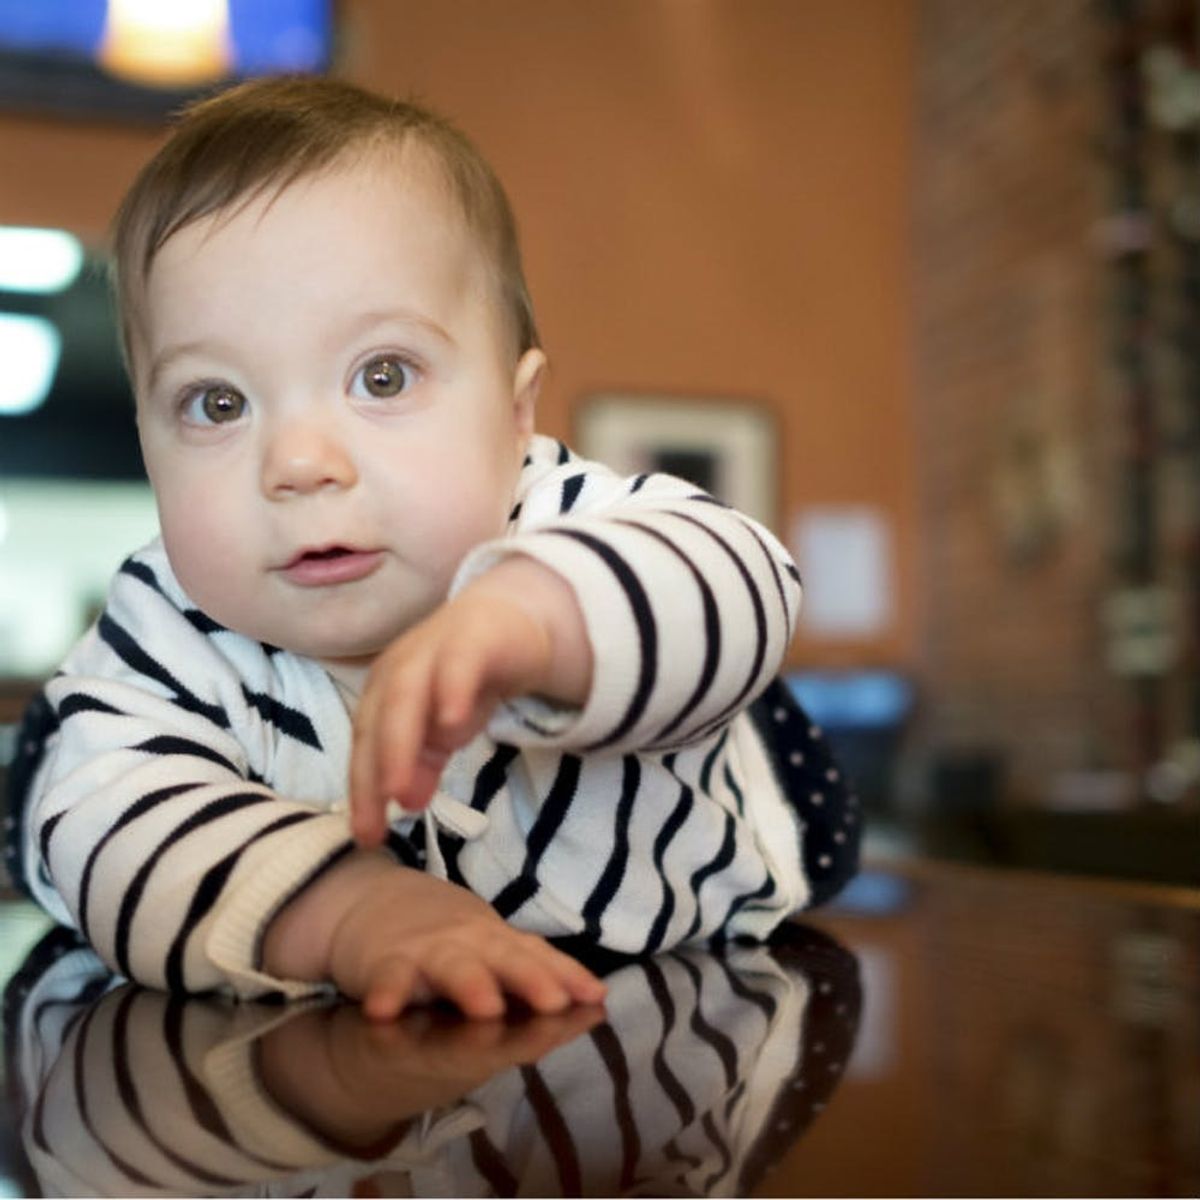 Can You Bring a Baby to a Bar? Yes, If You Follow These Expert Tips